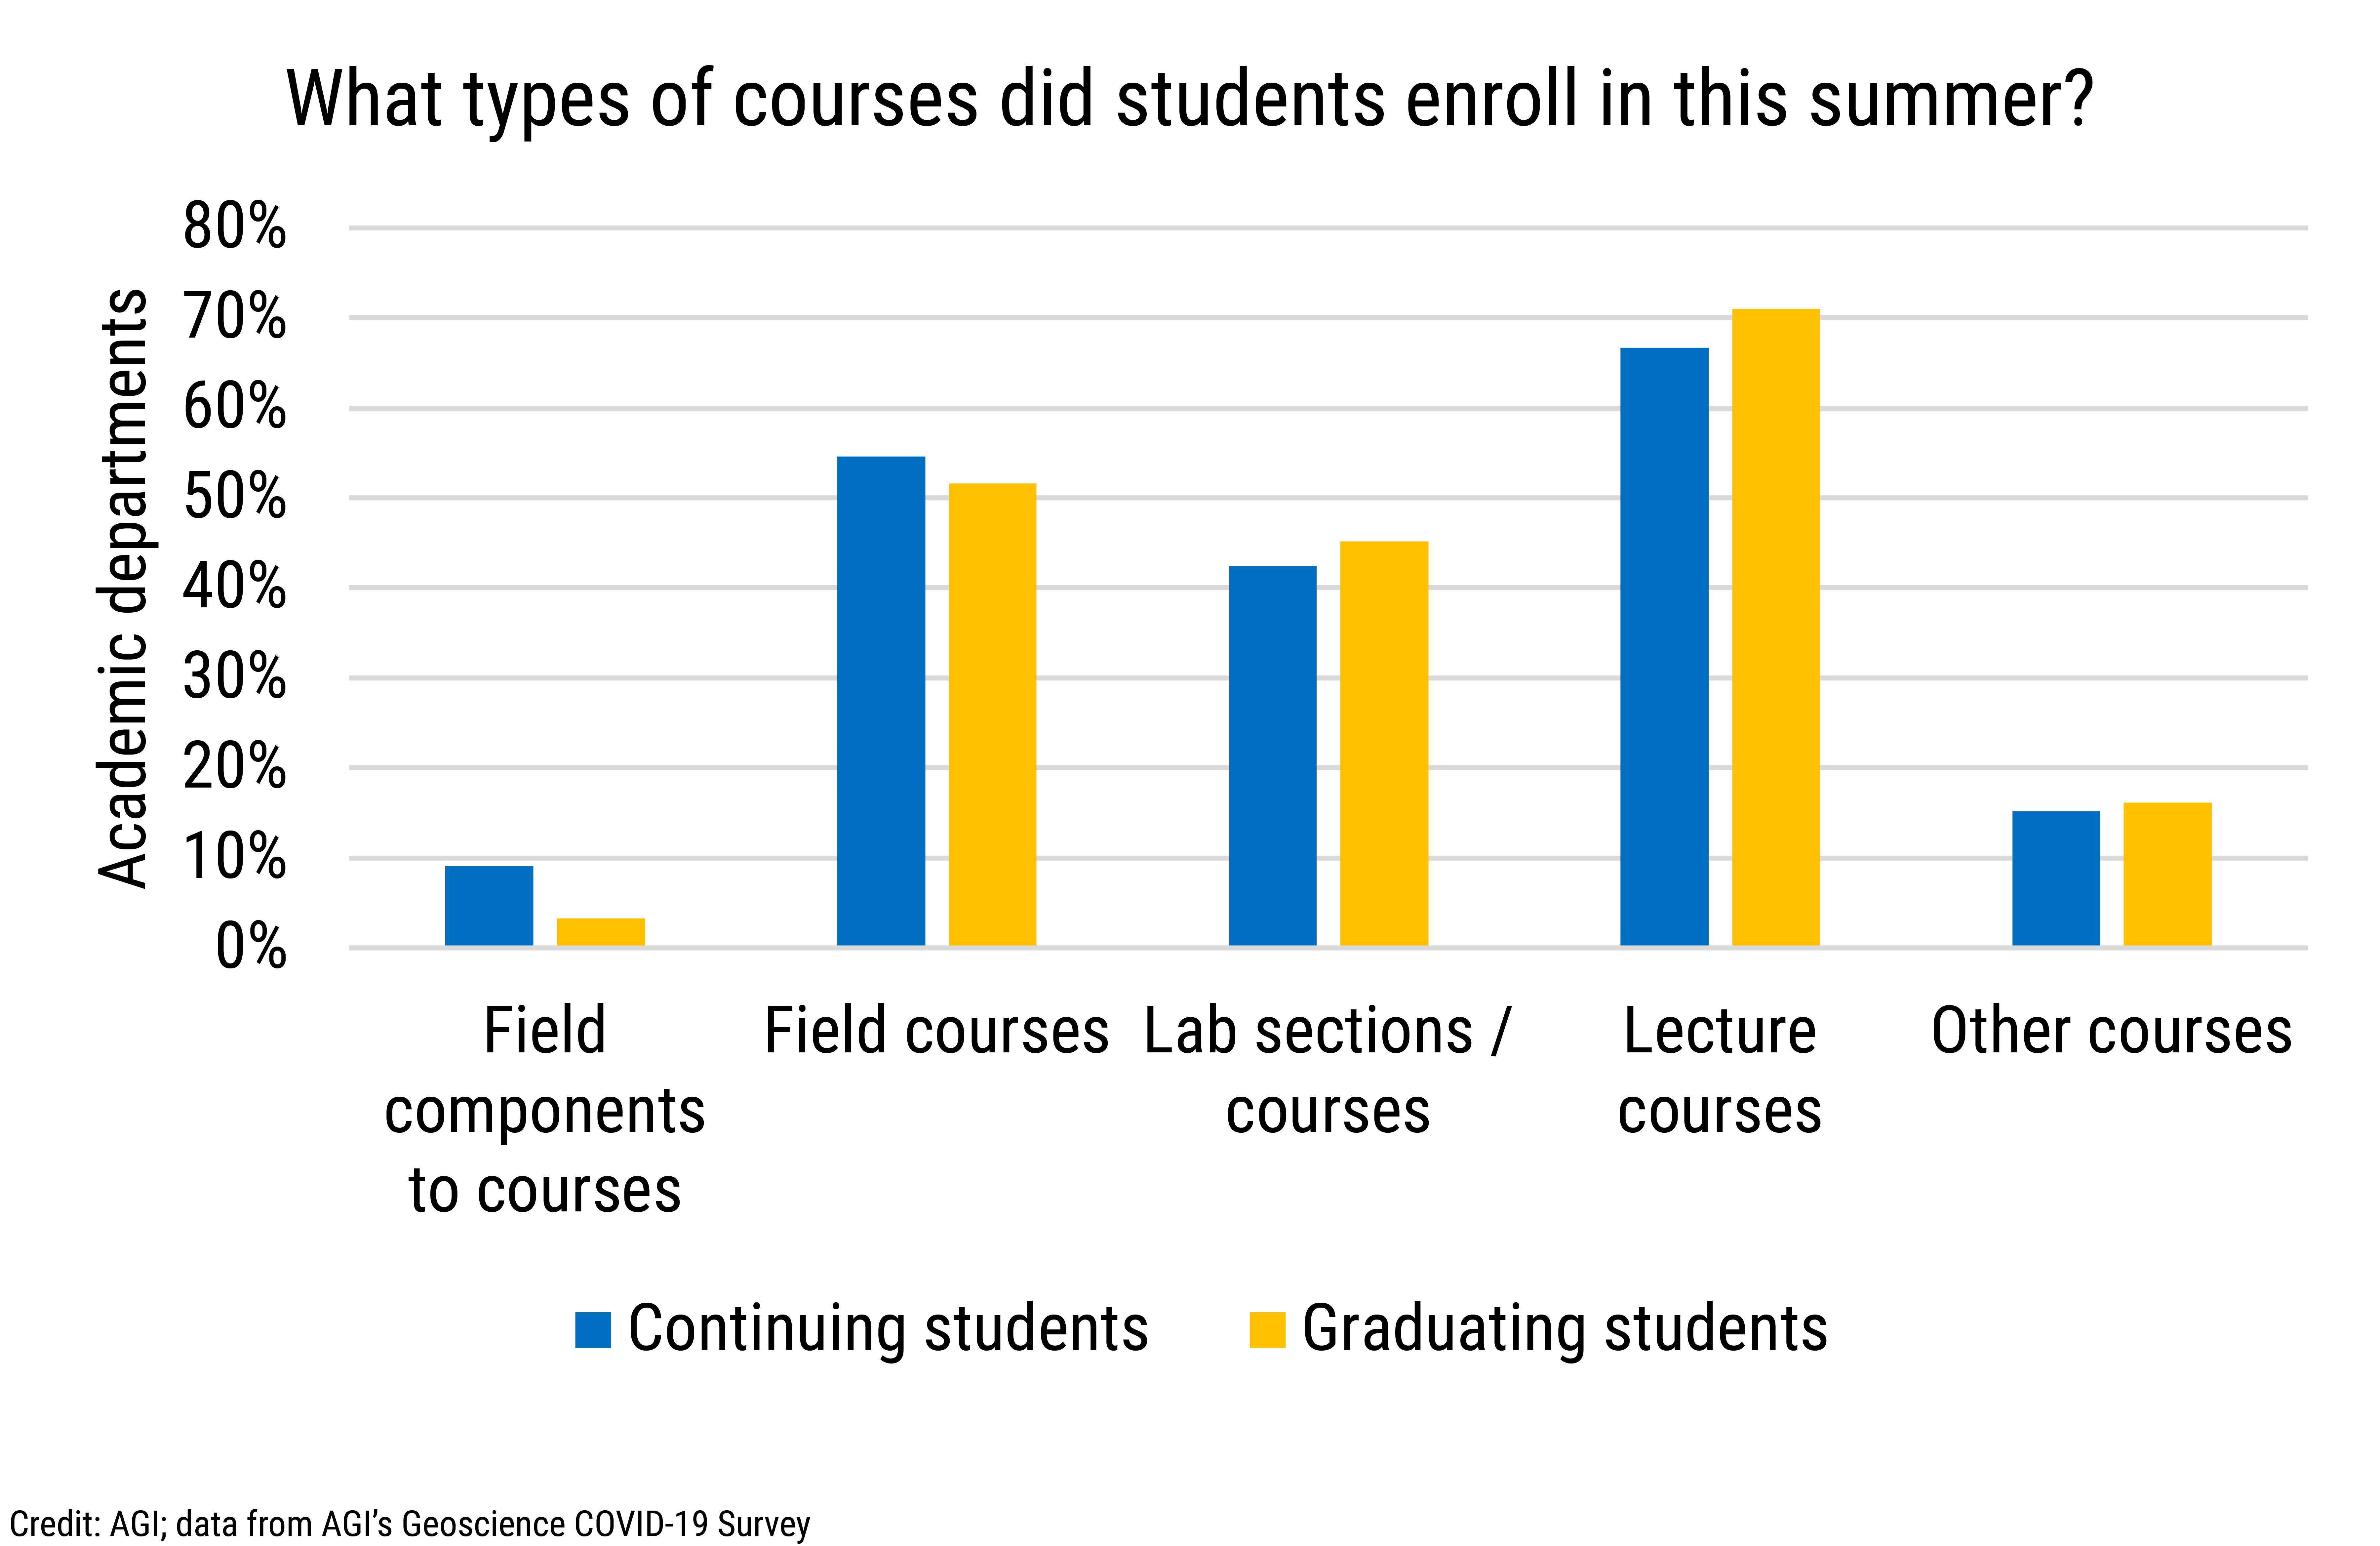 DB_2021-032 chart 06: What types of courses did students enroll in this summer? (Credit: AGI; data from AGI's Geoscience COVID-19 Survey)